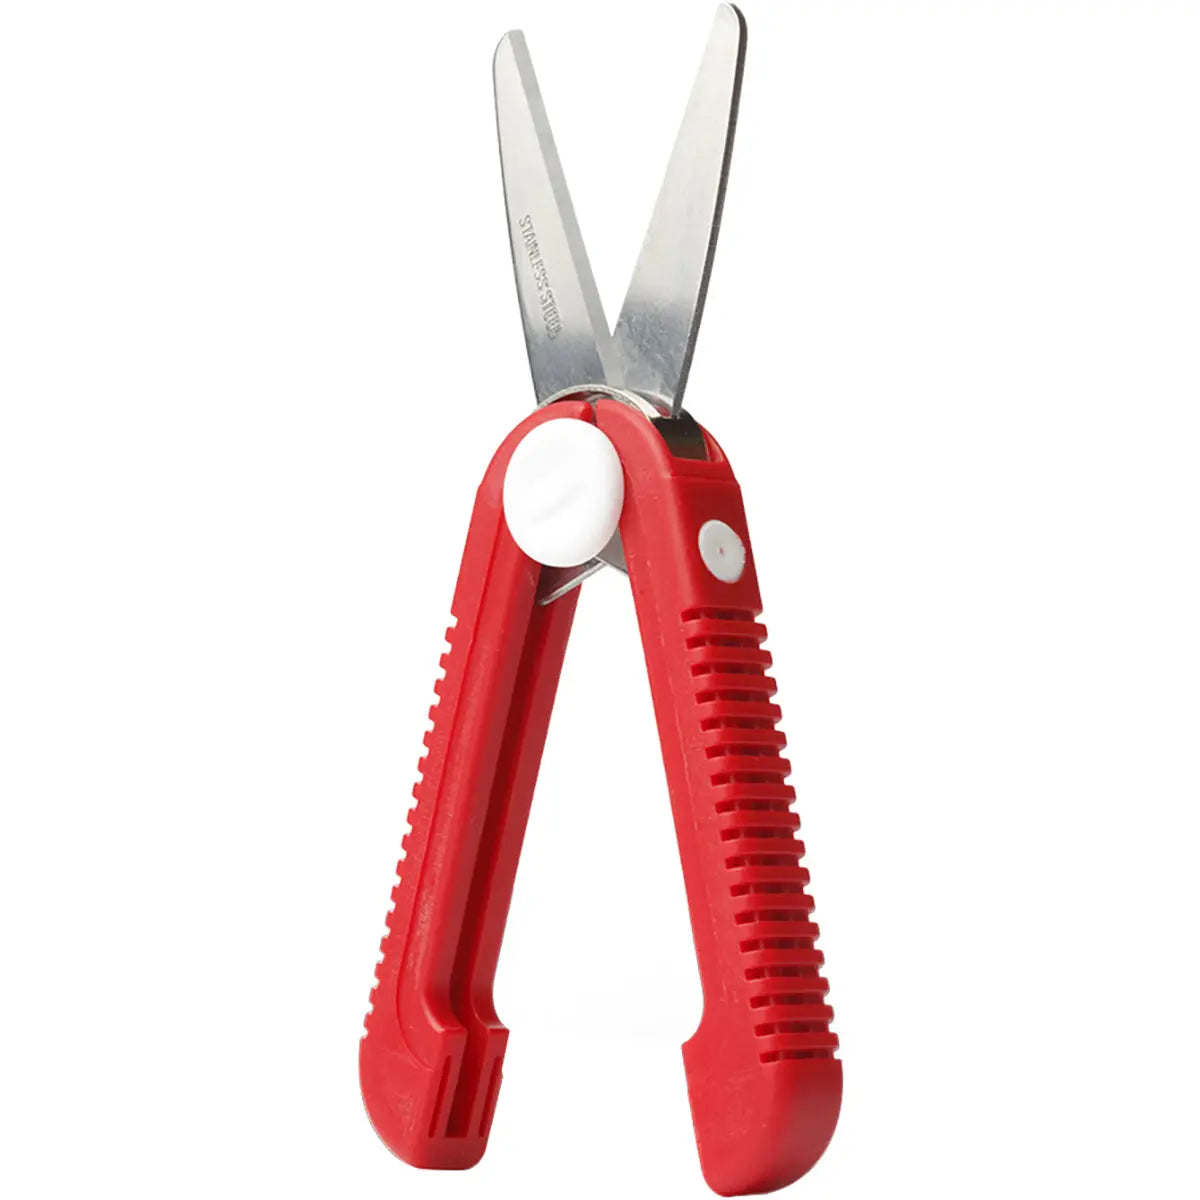 Coghlan's Outdoor Camping Safety Scissors Coghlan's